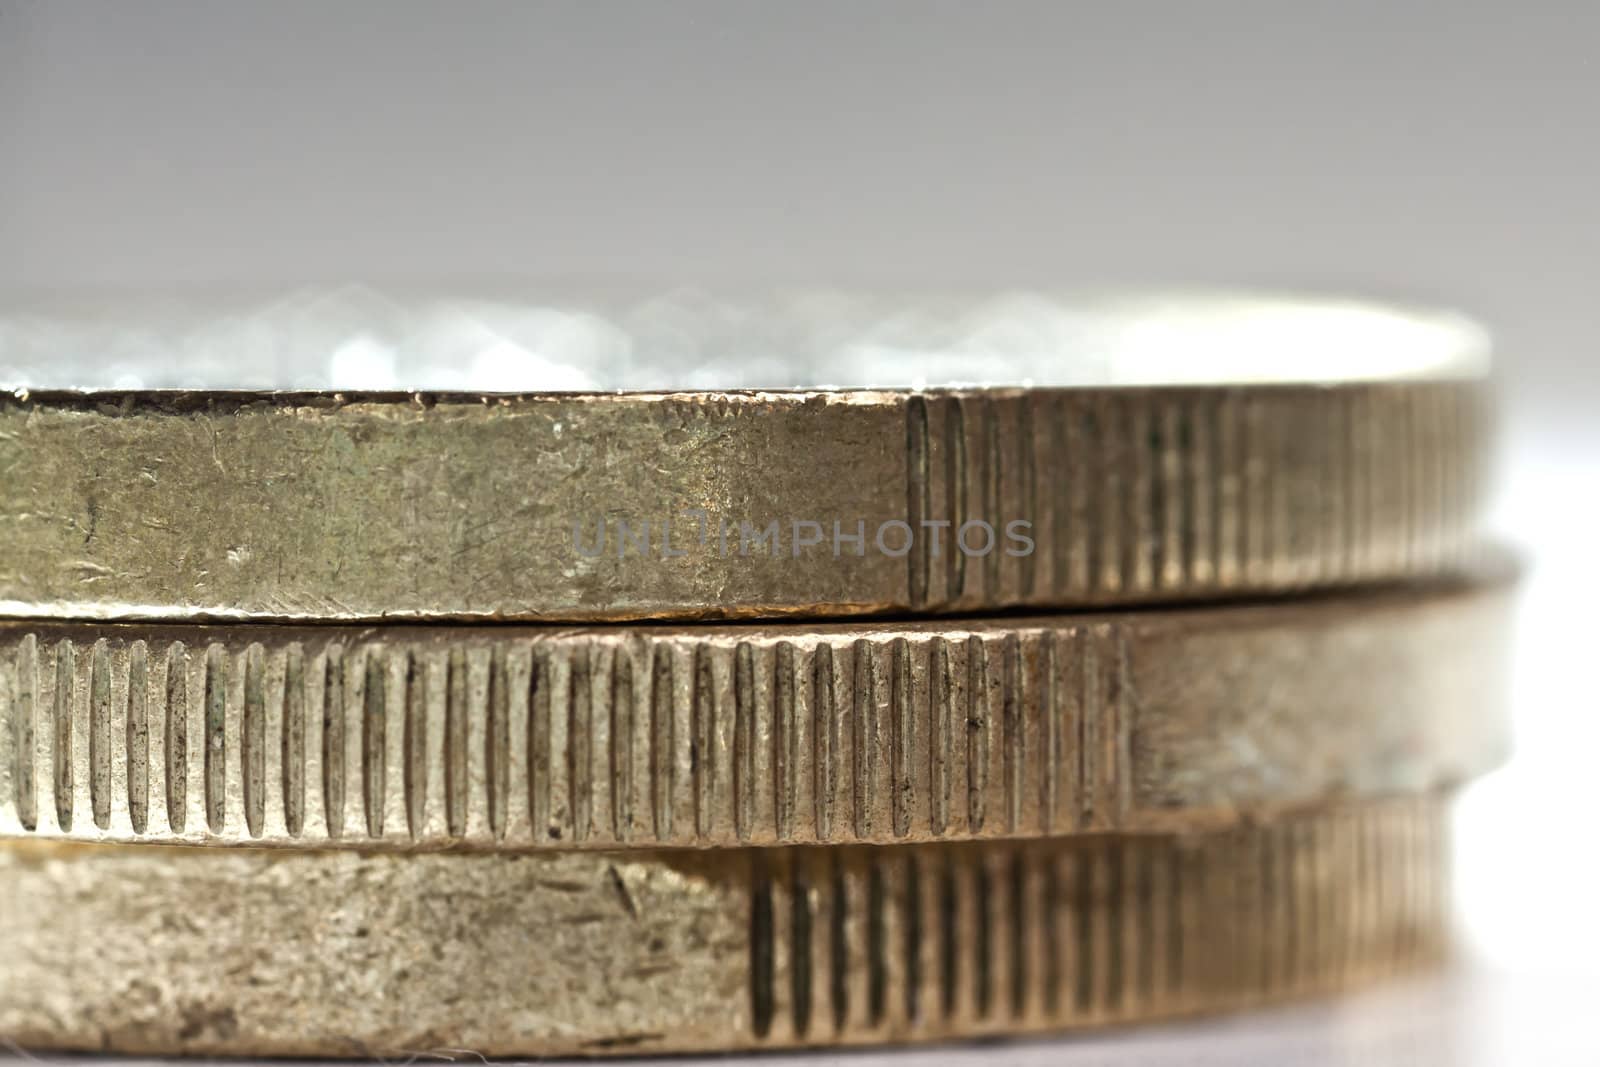 Euro Coin by PhotoWorks